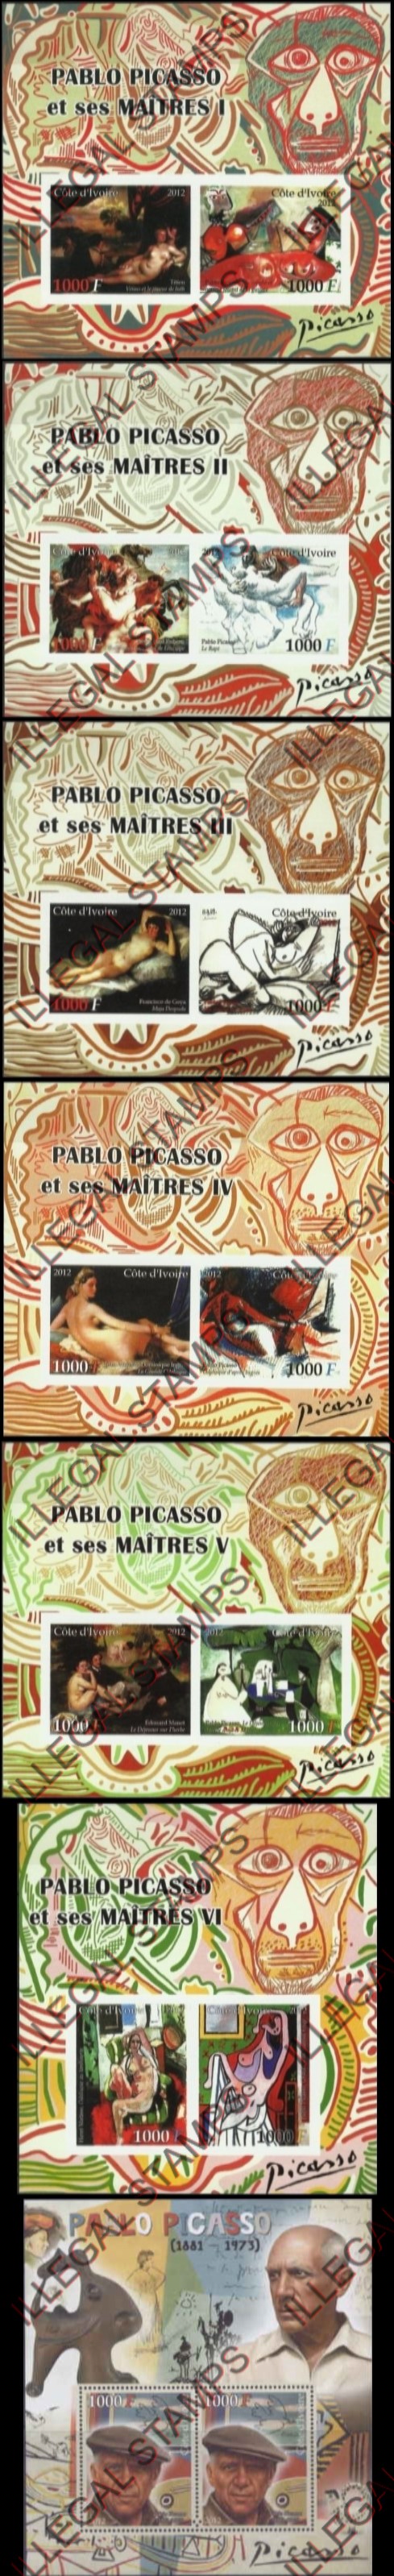 Ivory Coast 2012 Picasso Paintings Illegal Stamp Souvenir Sheets of 2